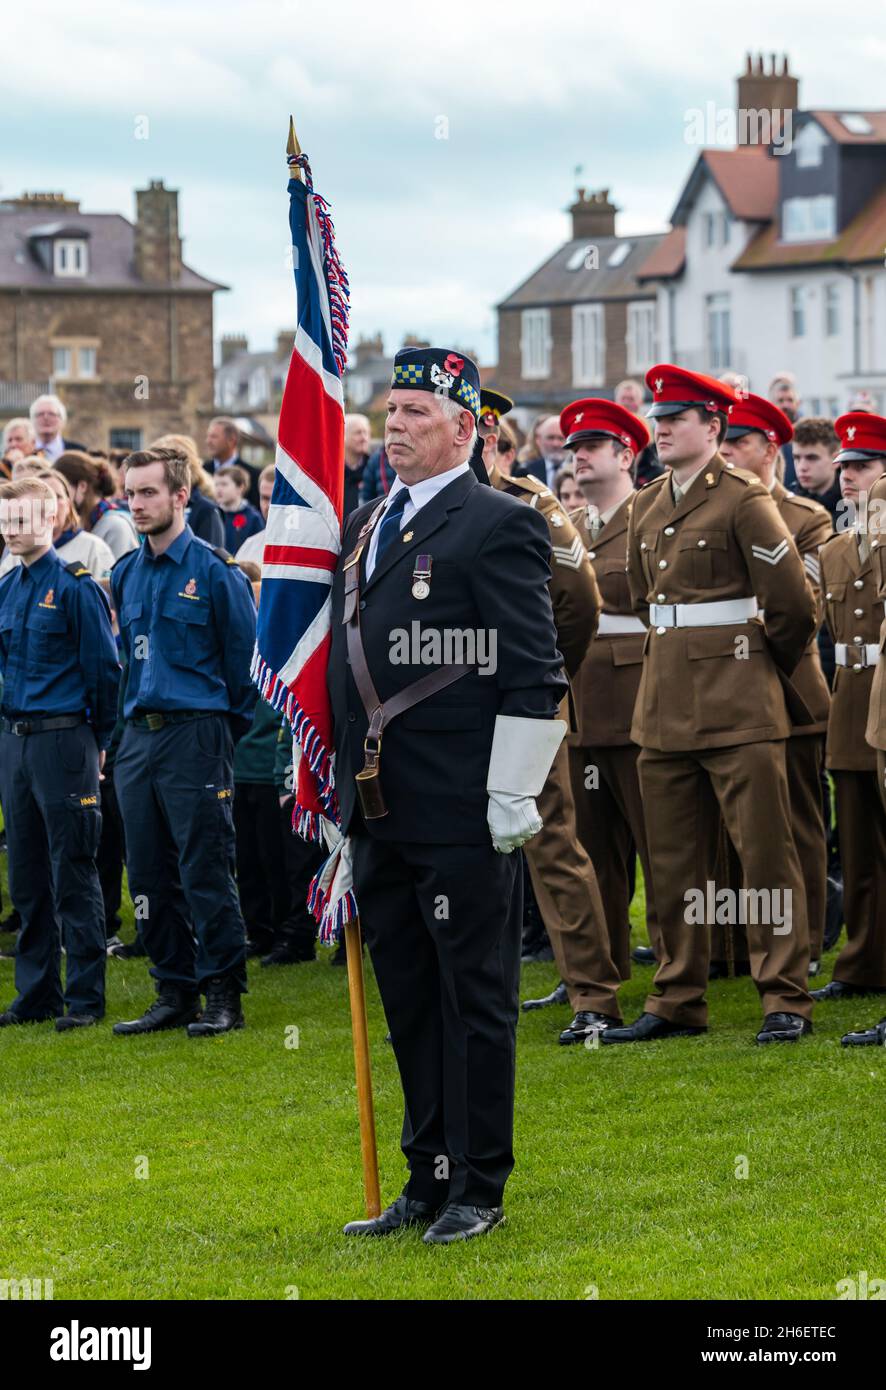 Soldiers standing to attention on Remembrance Day ceremony, Dunbar, East Lothian, Scotland, UK Stock Photo